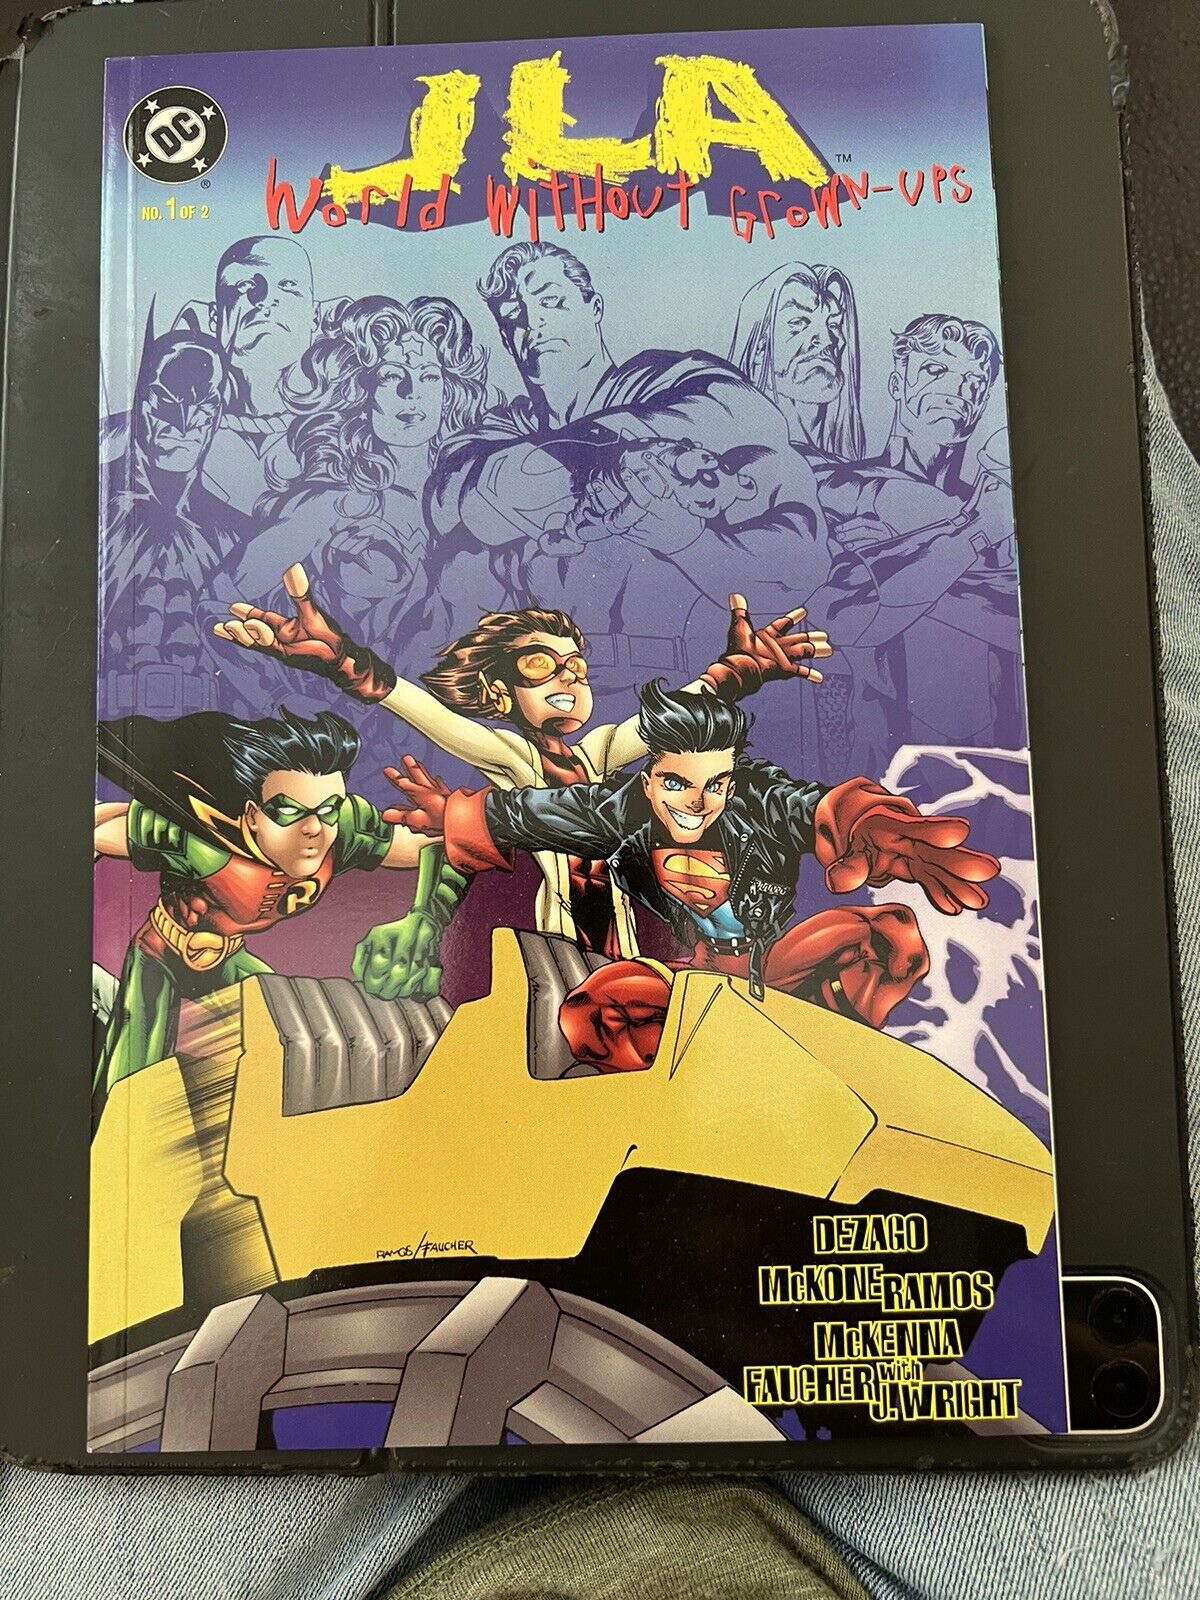 JLA: World Without Grown-Ups # 1, Featuring Young Justice, Superboy, Impulse